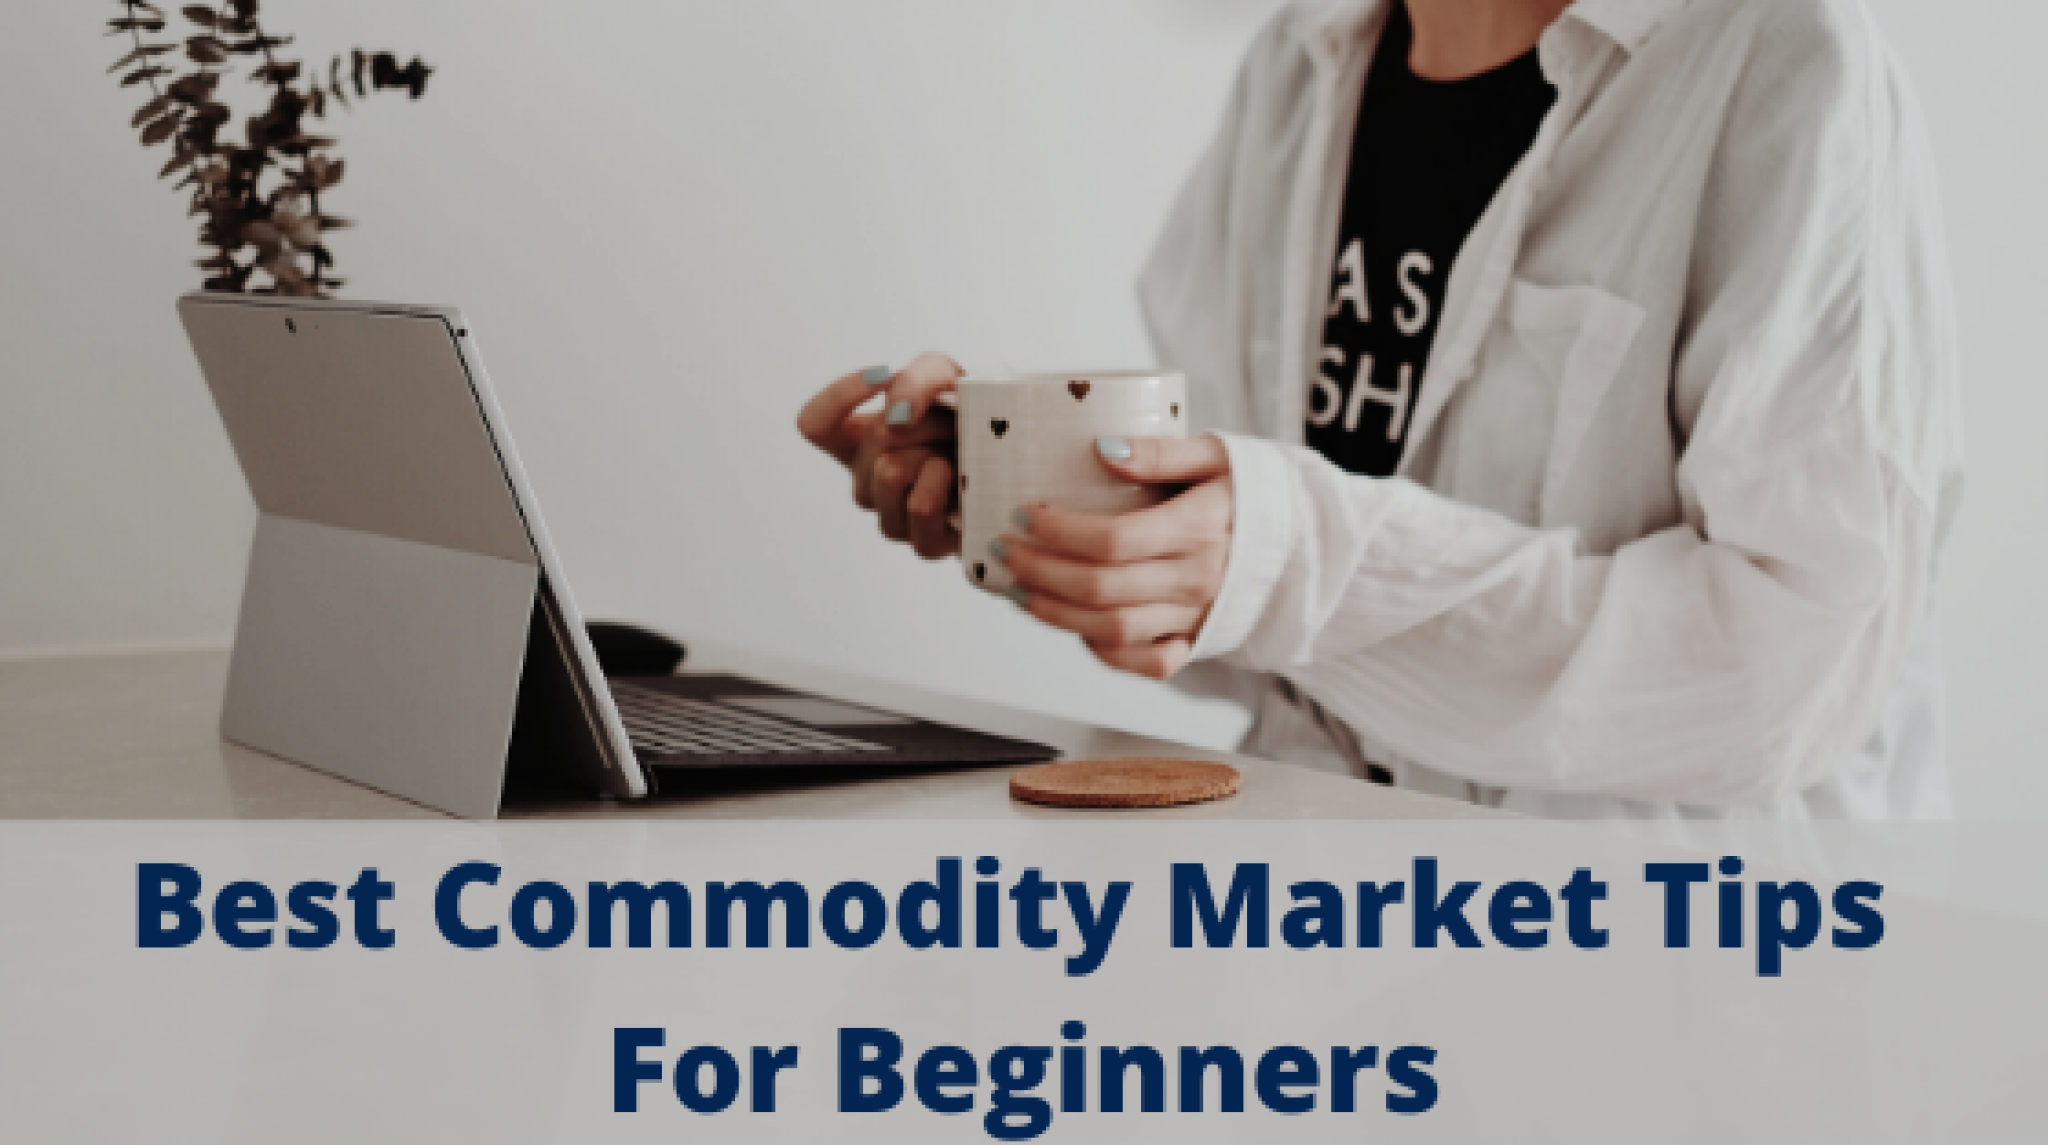 Best Commodity Market Tips For Beginners - Fxreviews.best